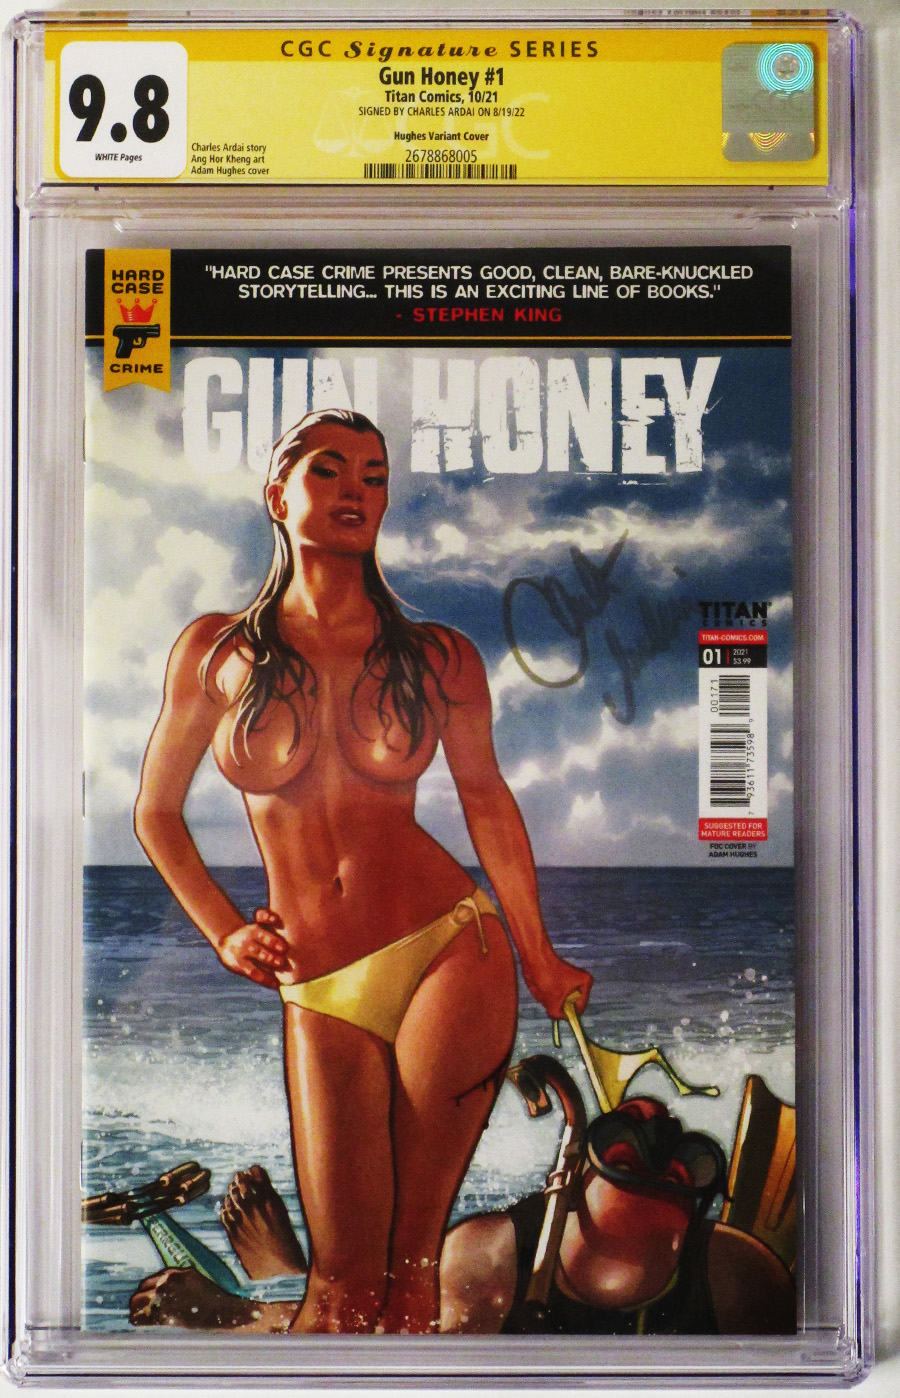 Hard Case Crime Gun Honey #1 Cover N Variant Adam Hughes Cover Signed by Charles Ardai CGC Graded 9.8